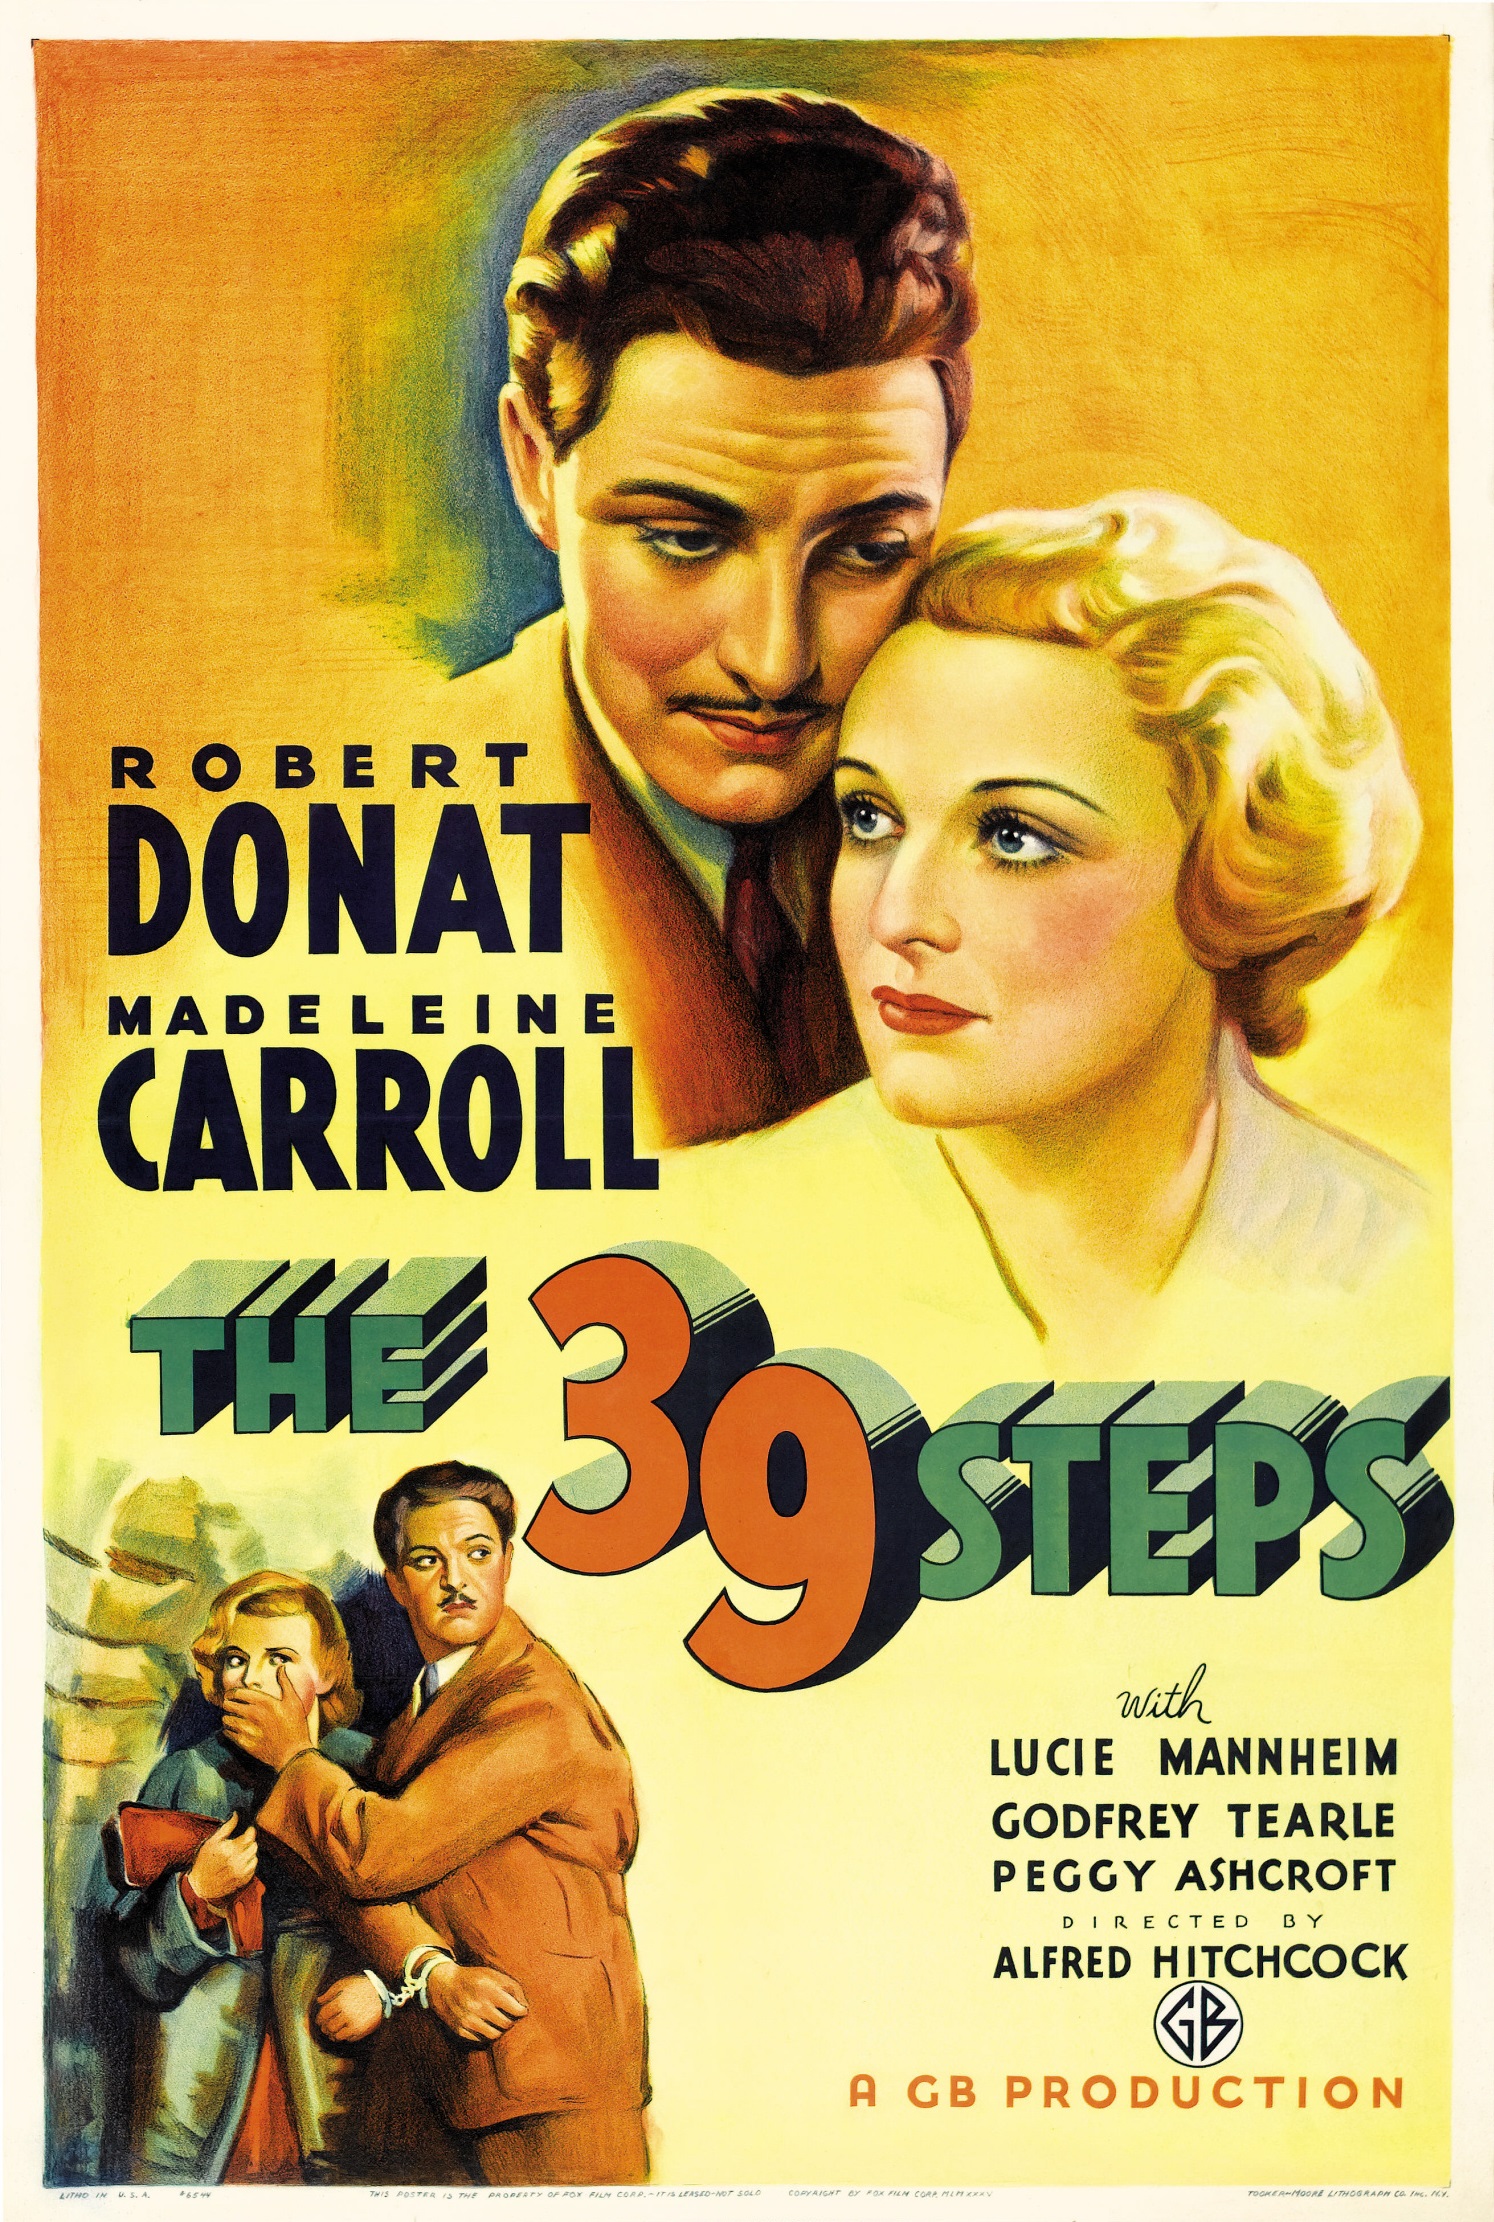 The 39 Steps (1935, dir. Alfred Hitchcock) US one sheet poster